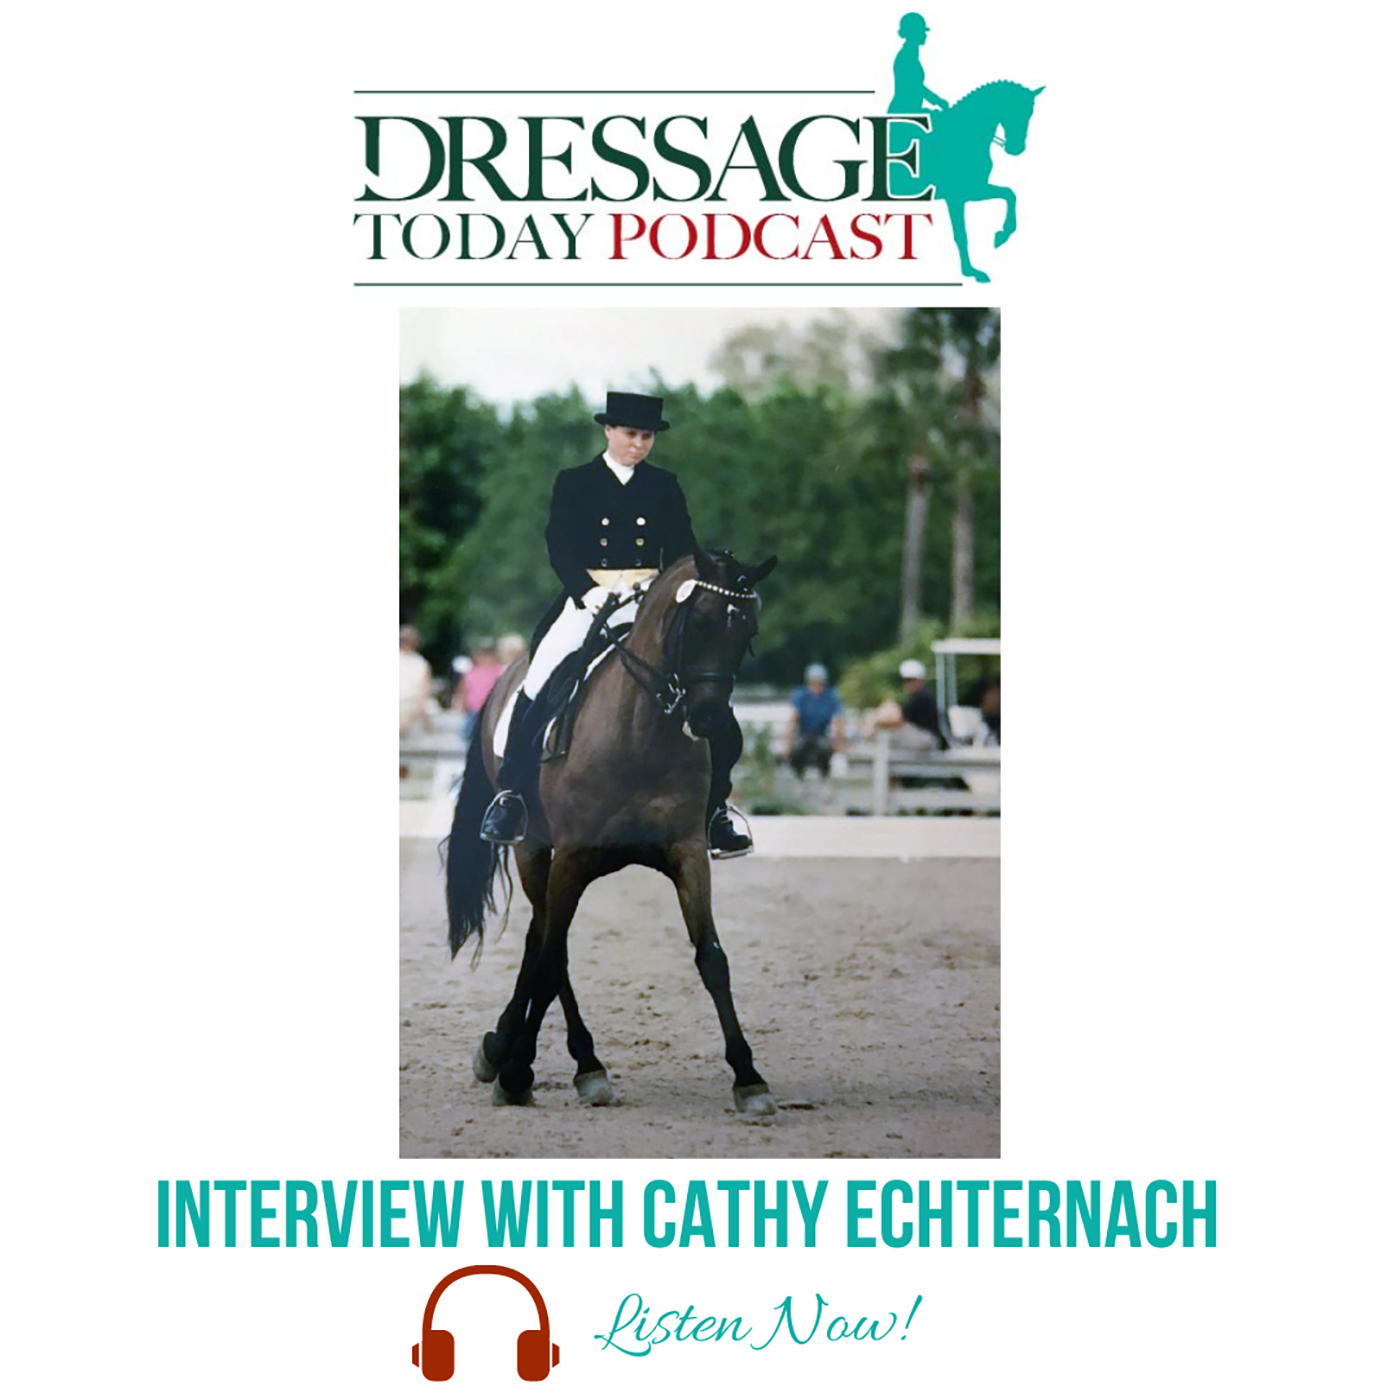 Interview with Cathy Echternach – Dressage Today Podcast